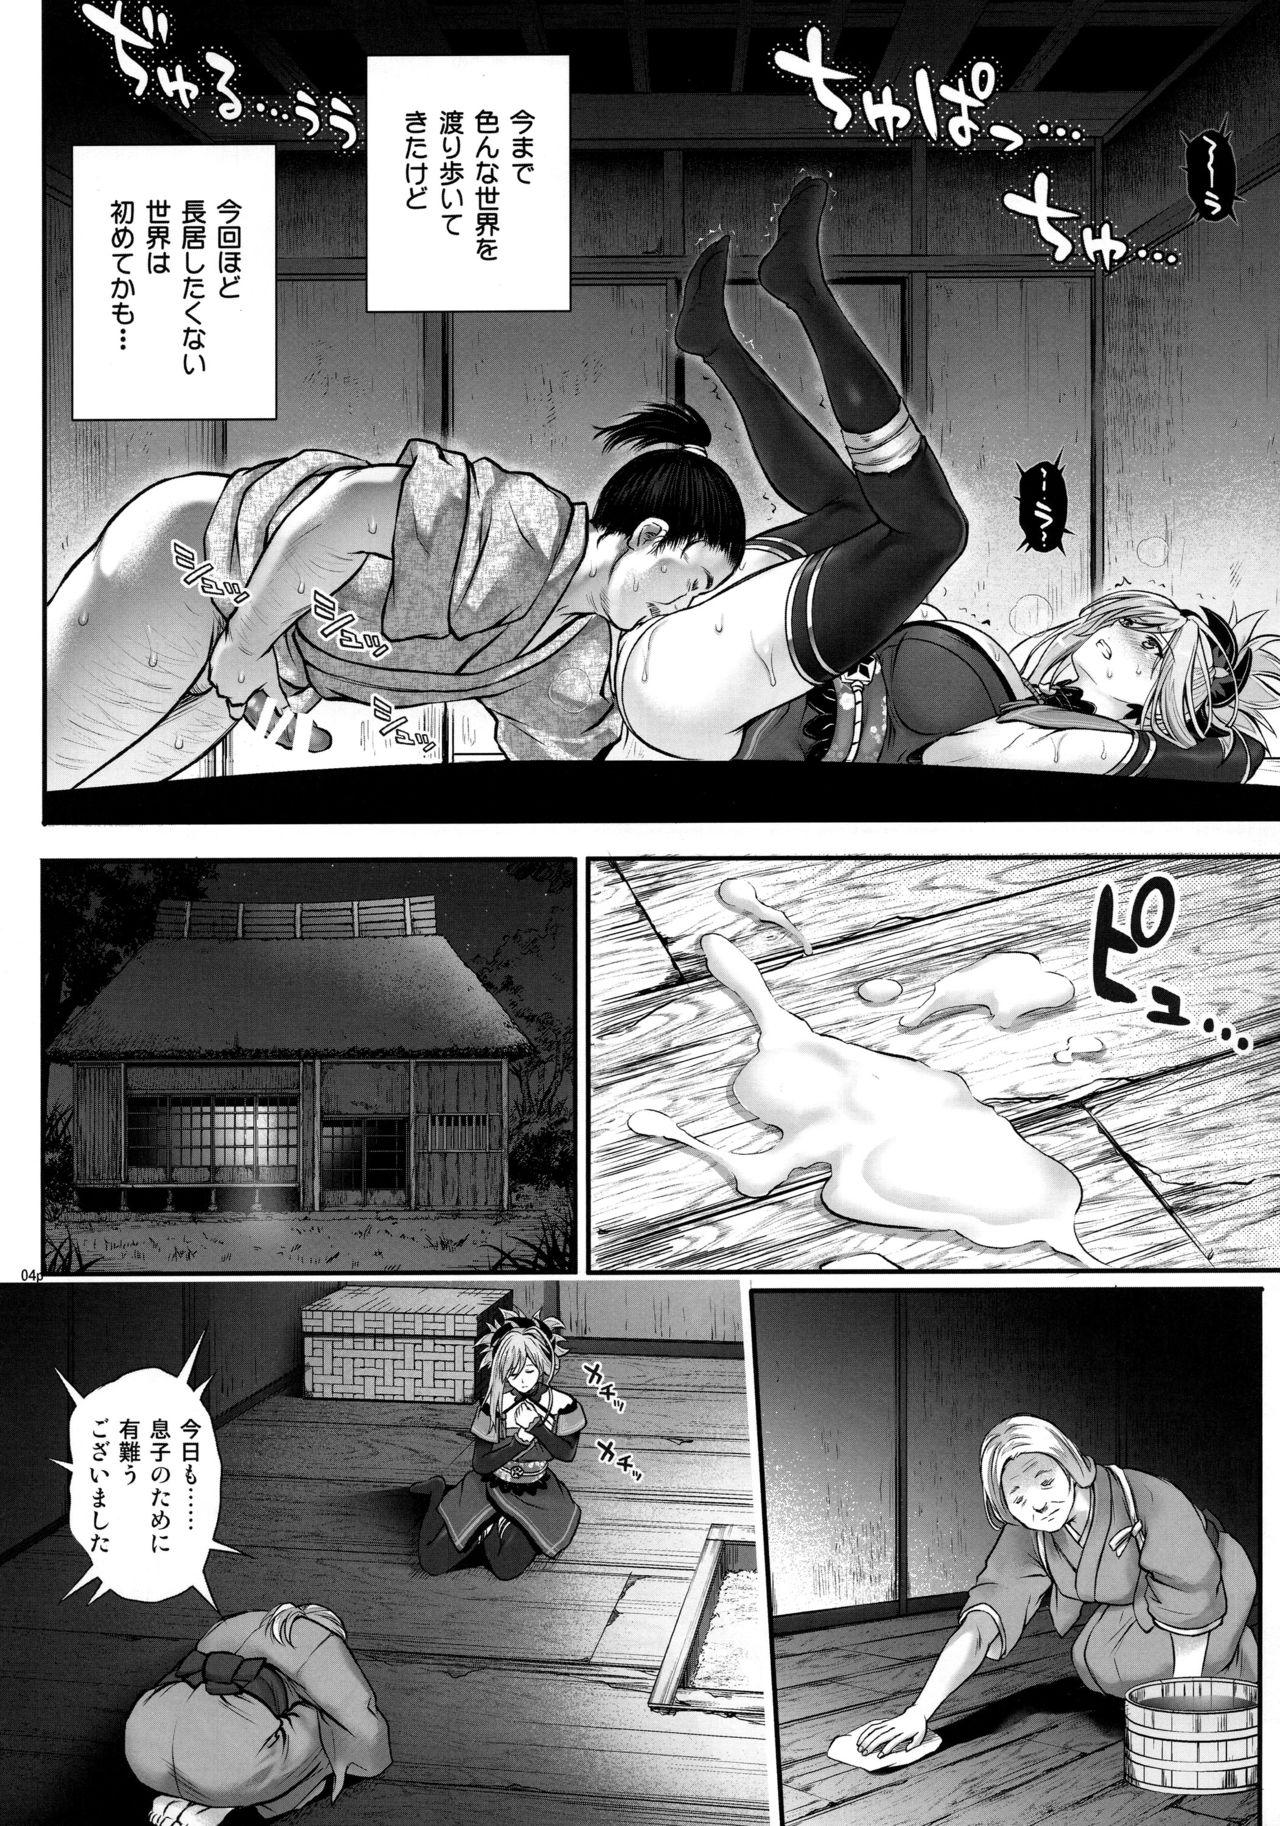 Stroking T-32 hooollow - Fate grand order Famosa - Page 4